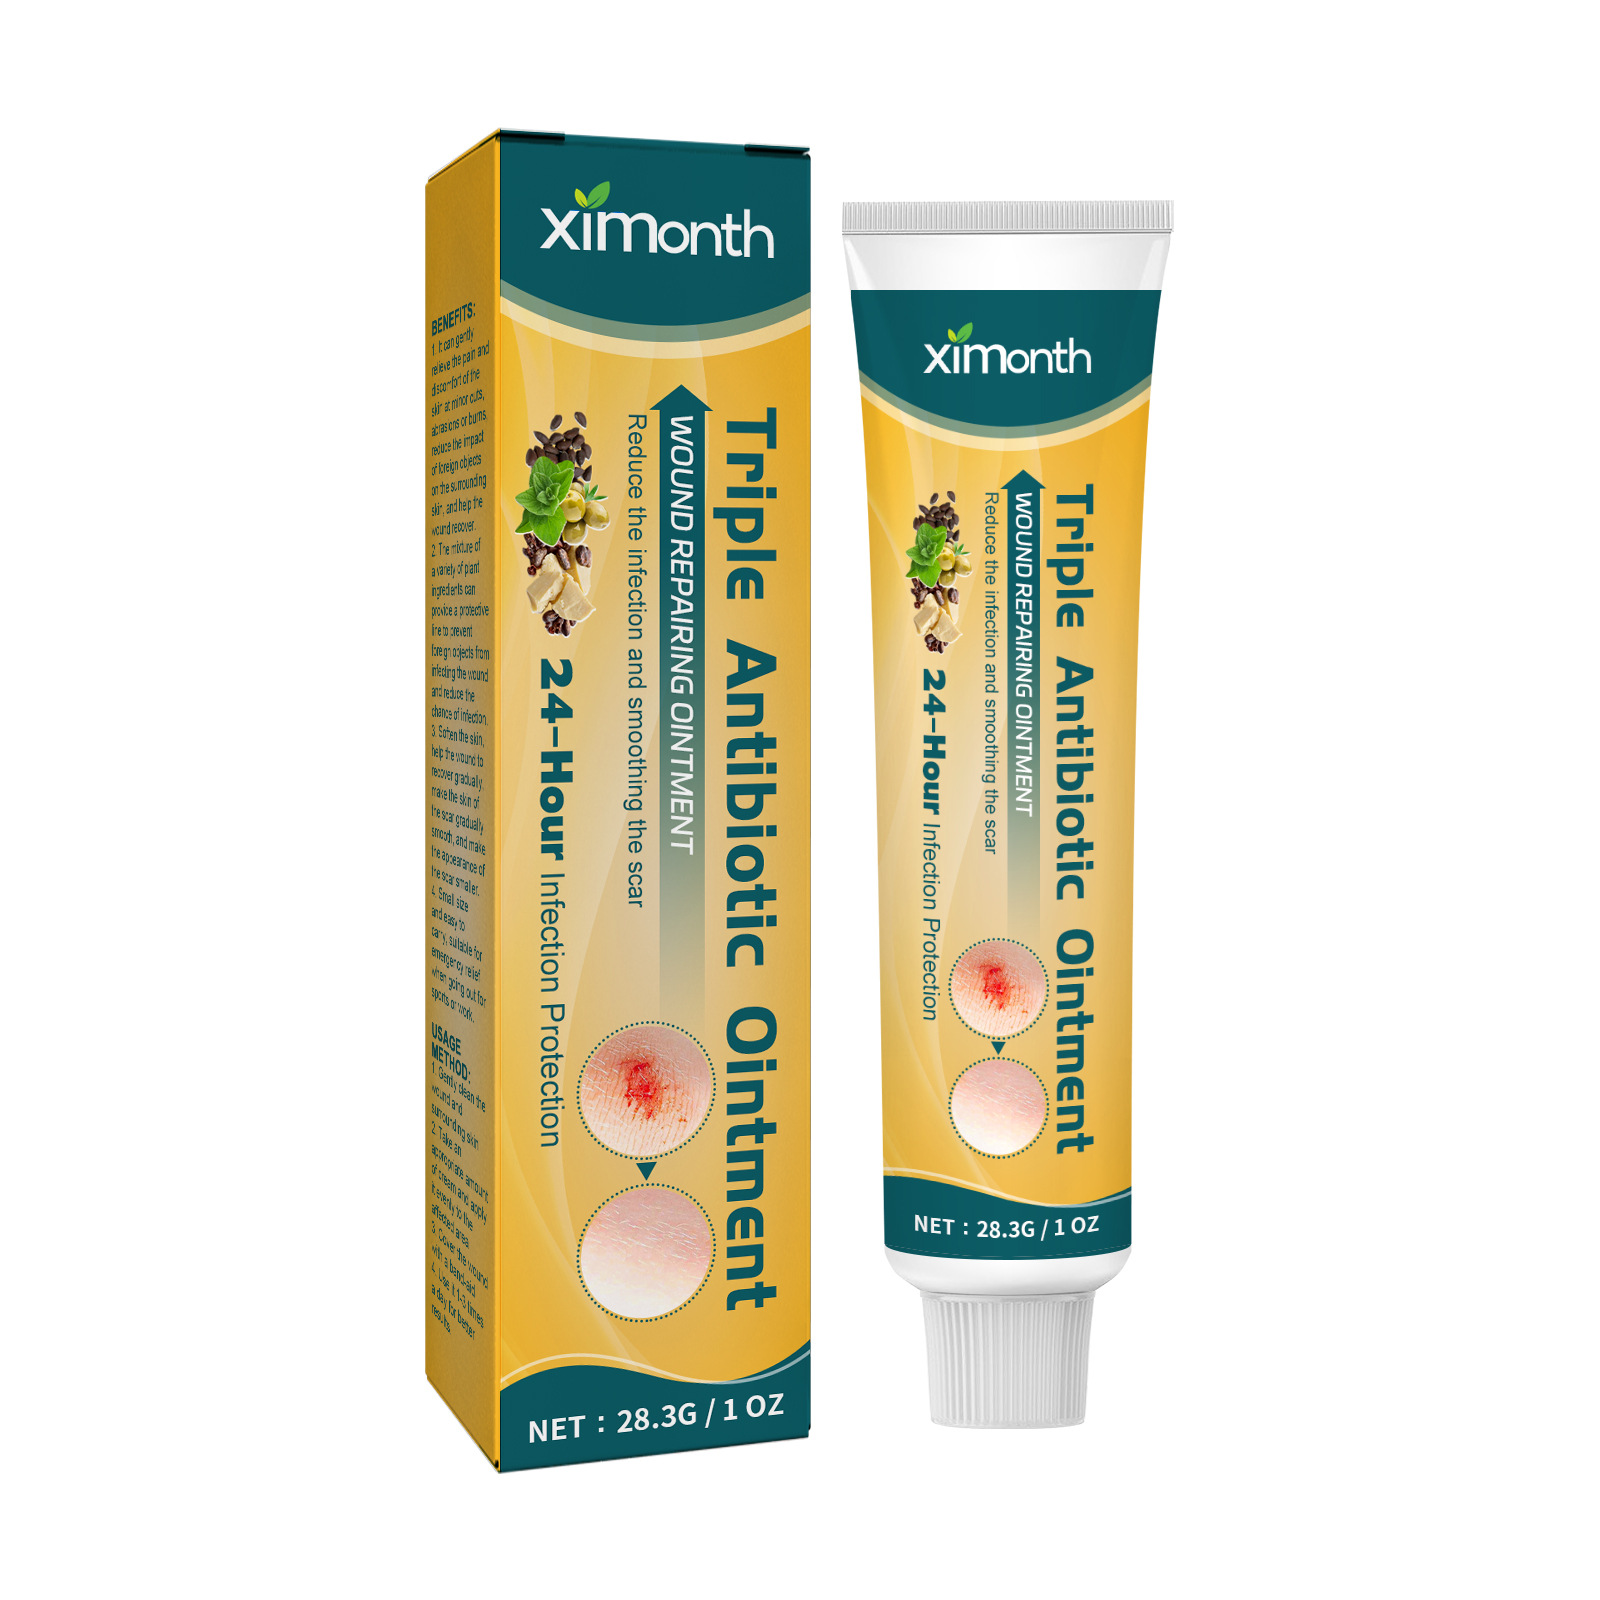 Ximonth Skin Repair Ointment